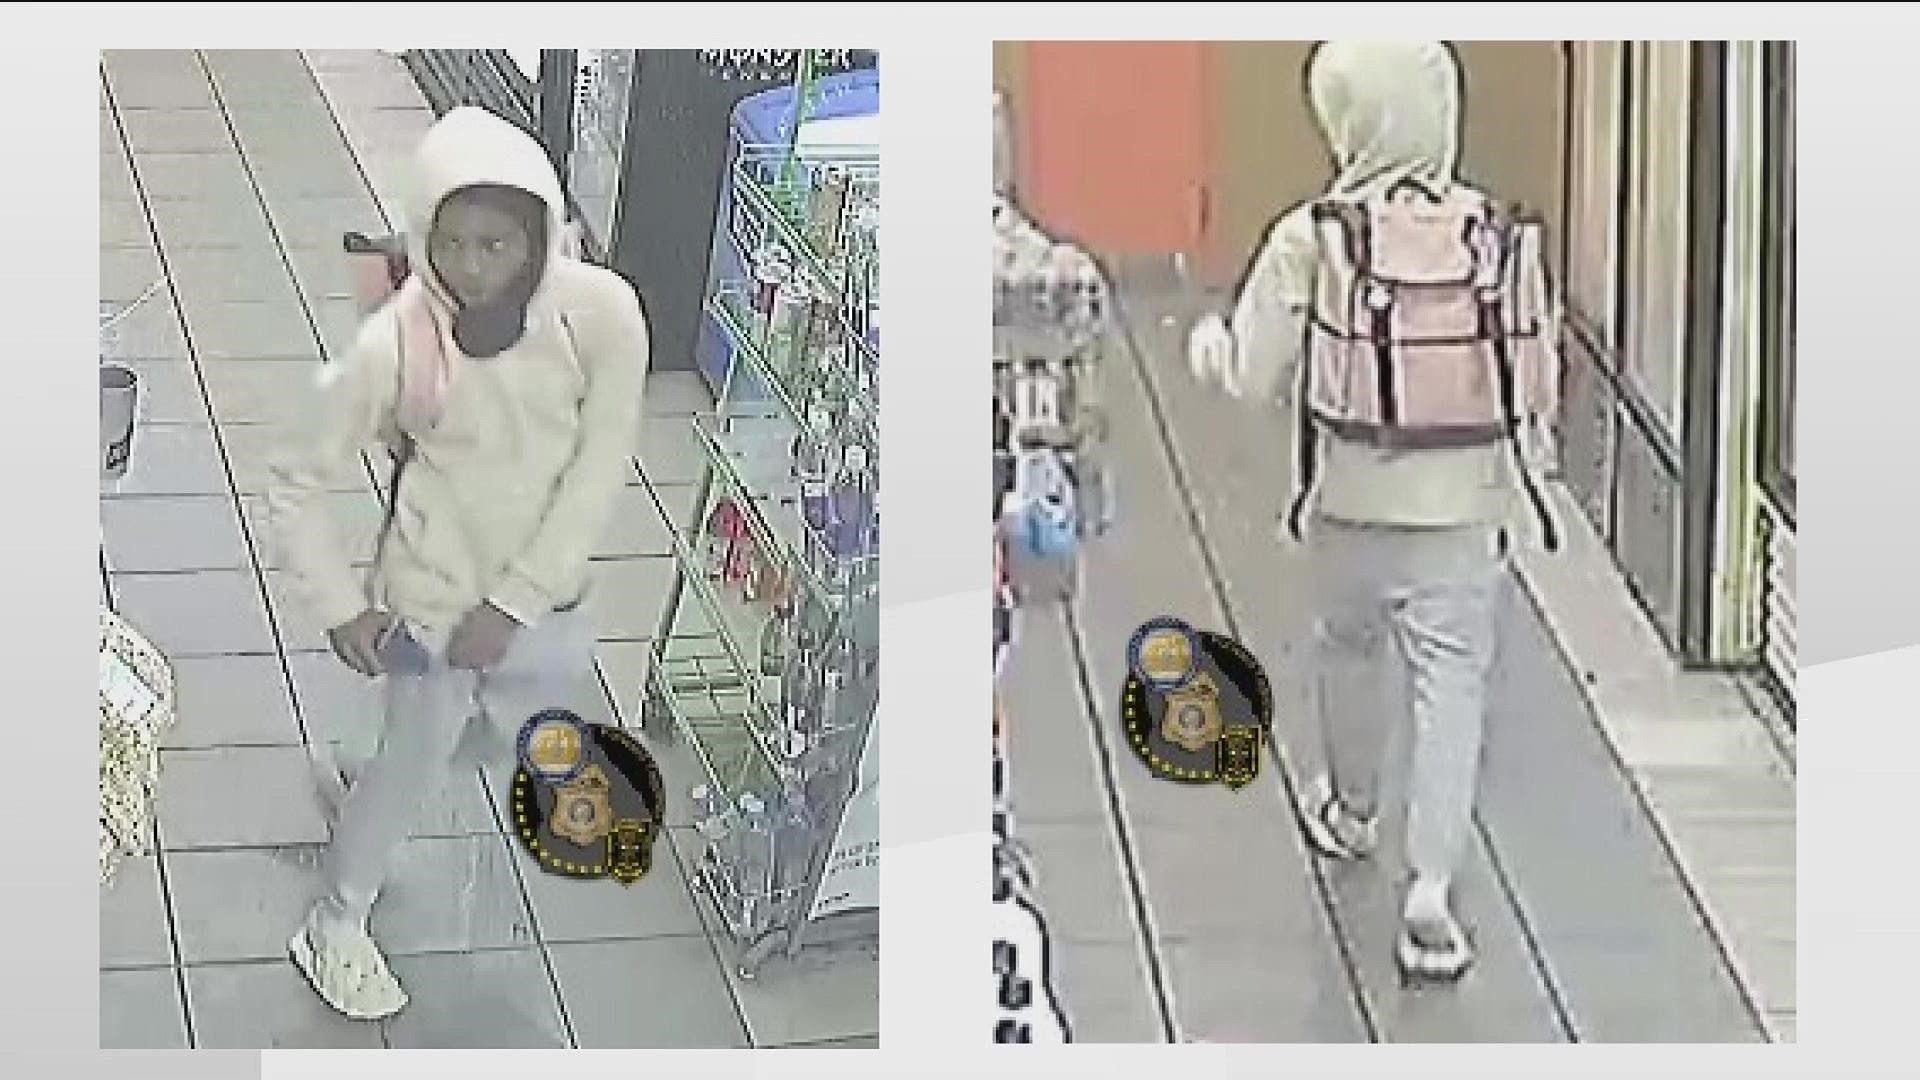 Police are asking the public to help them identify the individuals.